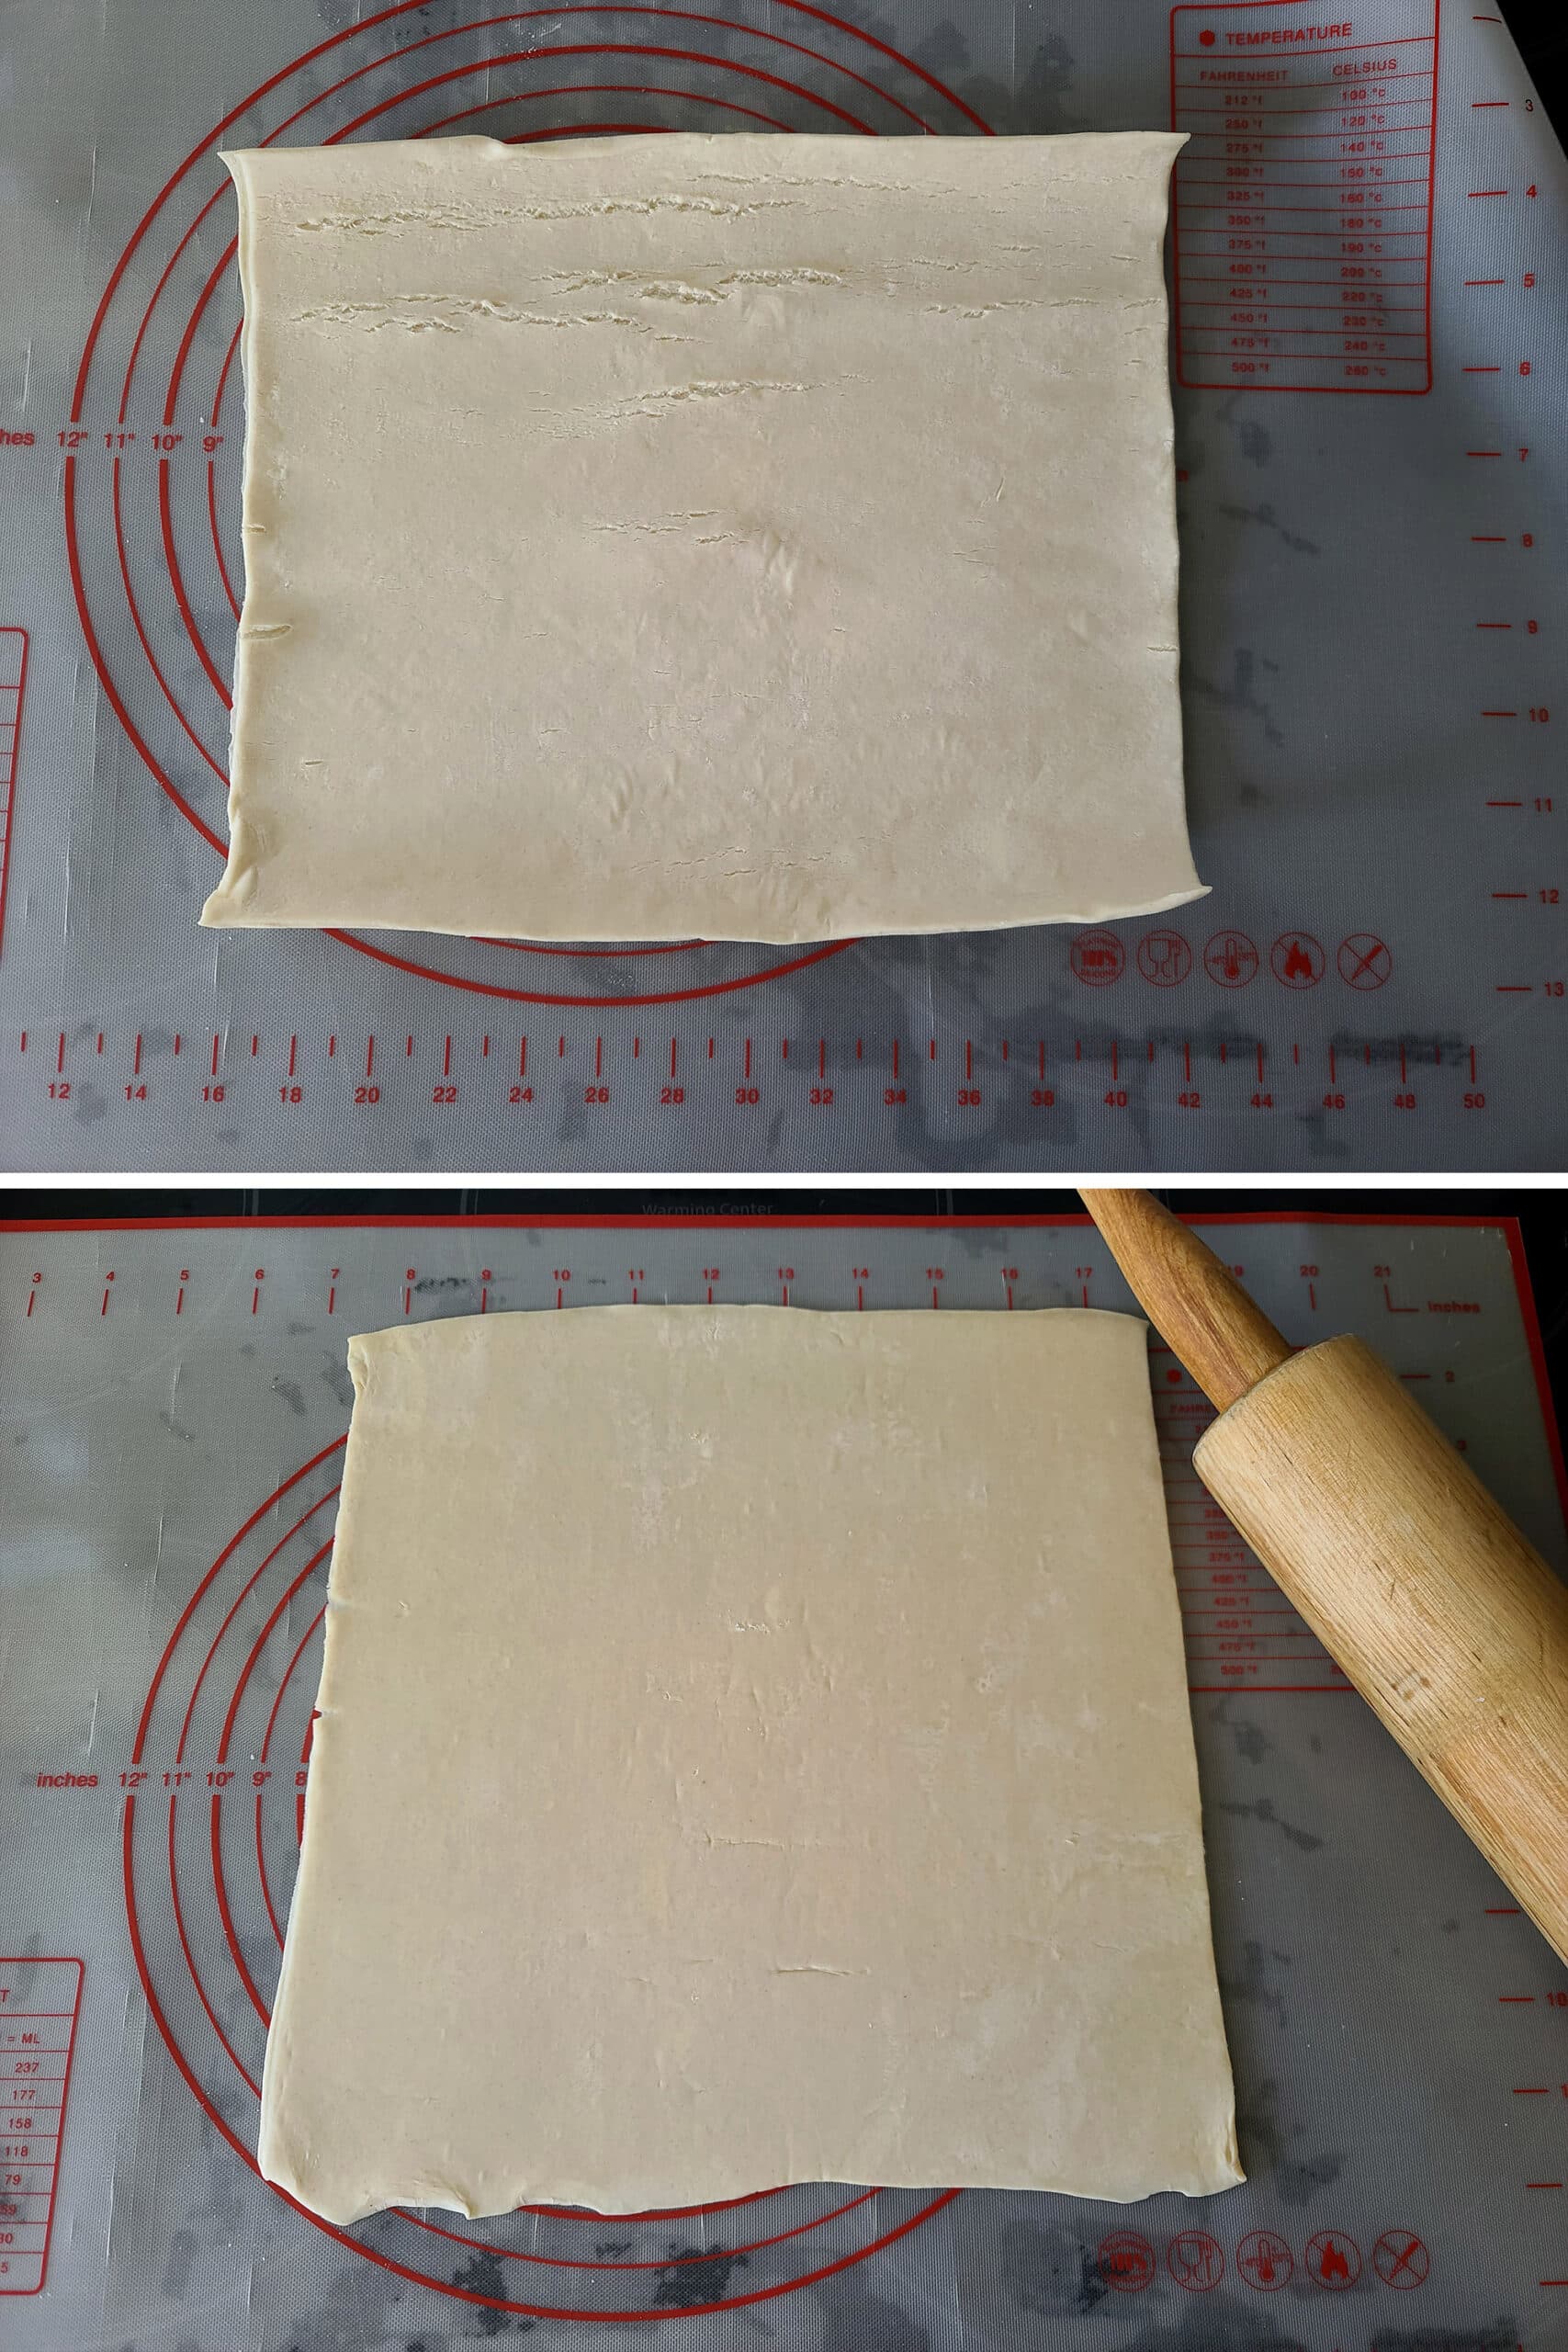 2 part image showing a sheet of puff pastry being rolled.